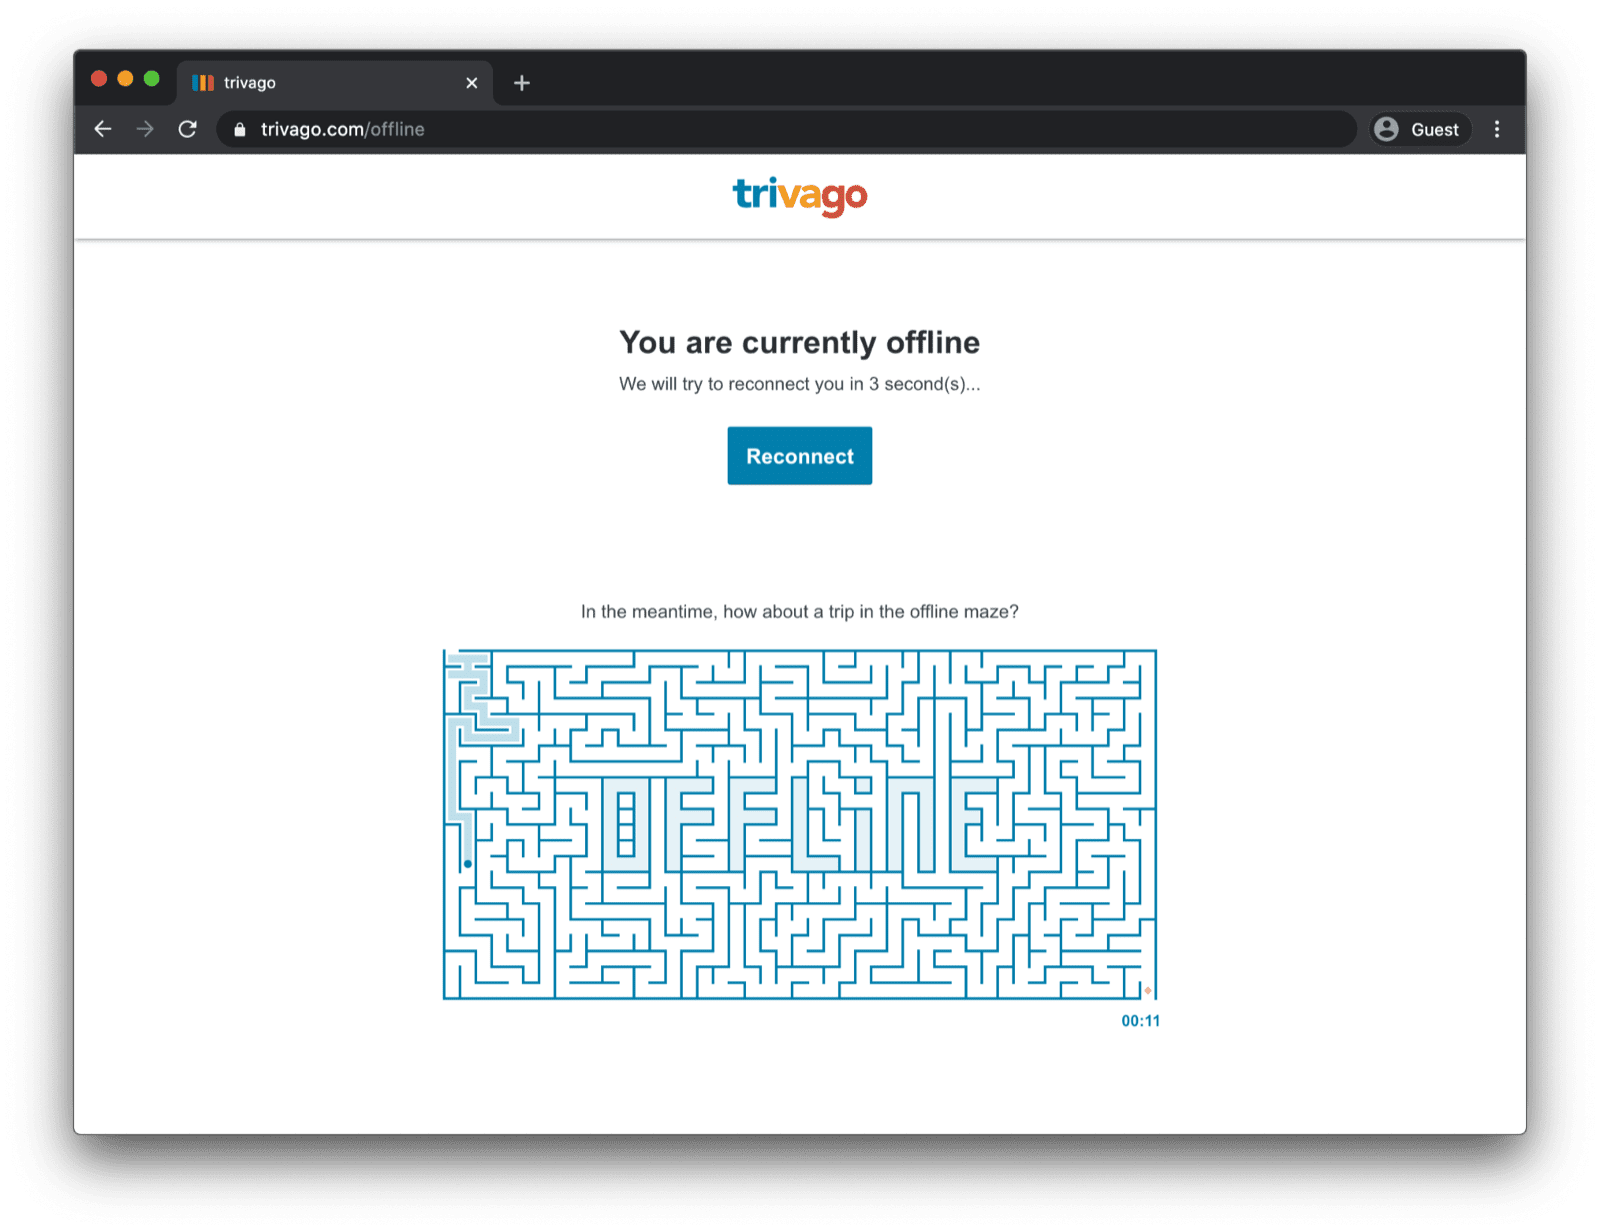 The trivago offline page with the trivago offline maze.